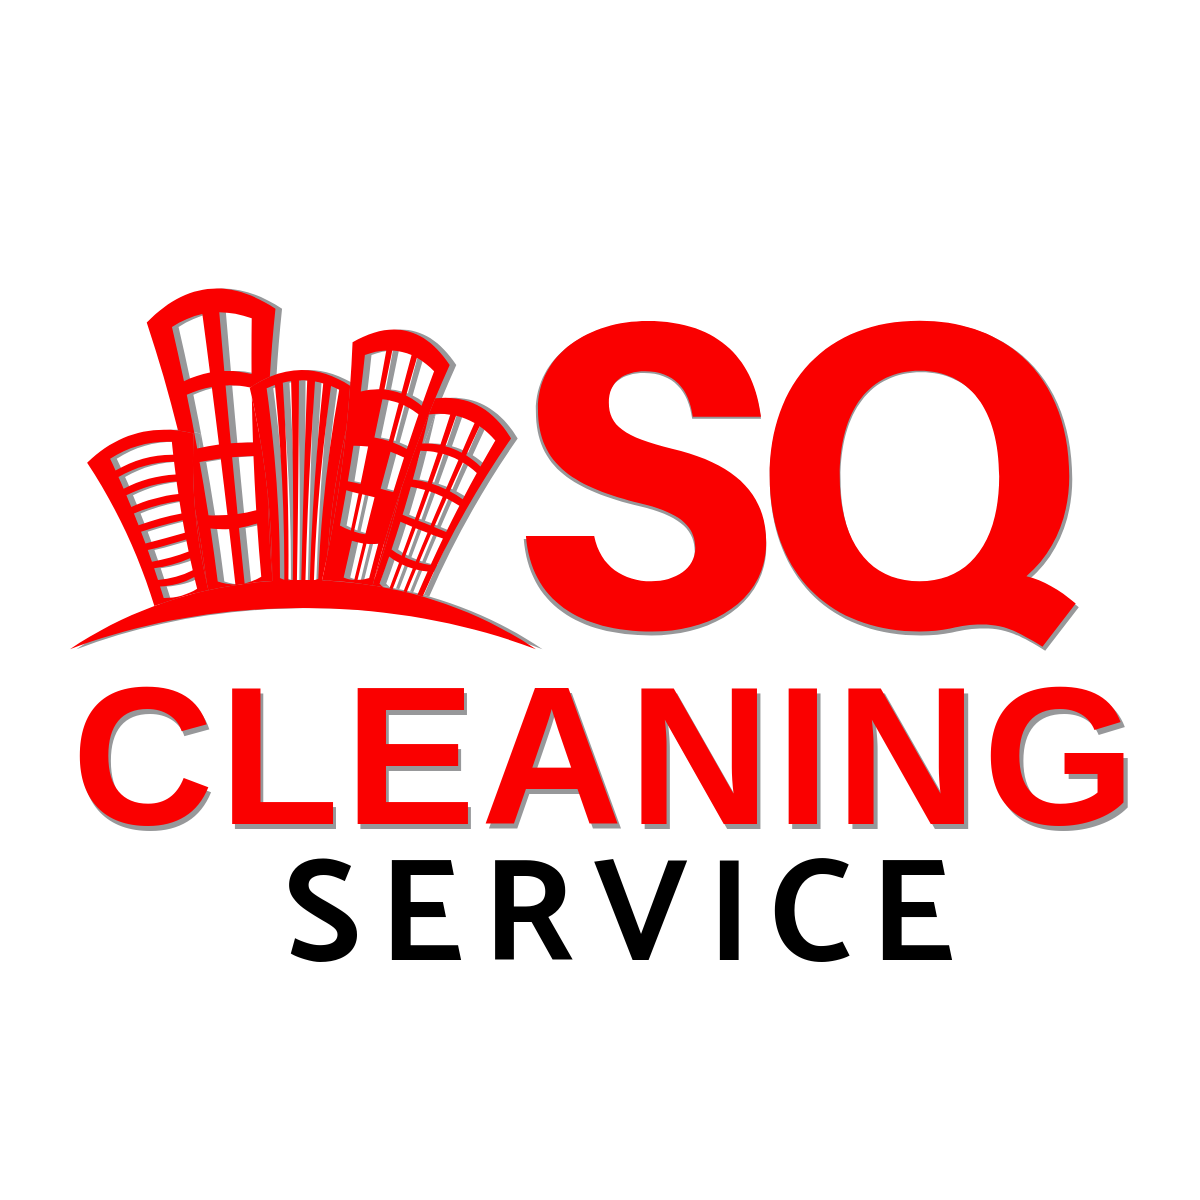 SQ Cleaning Service